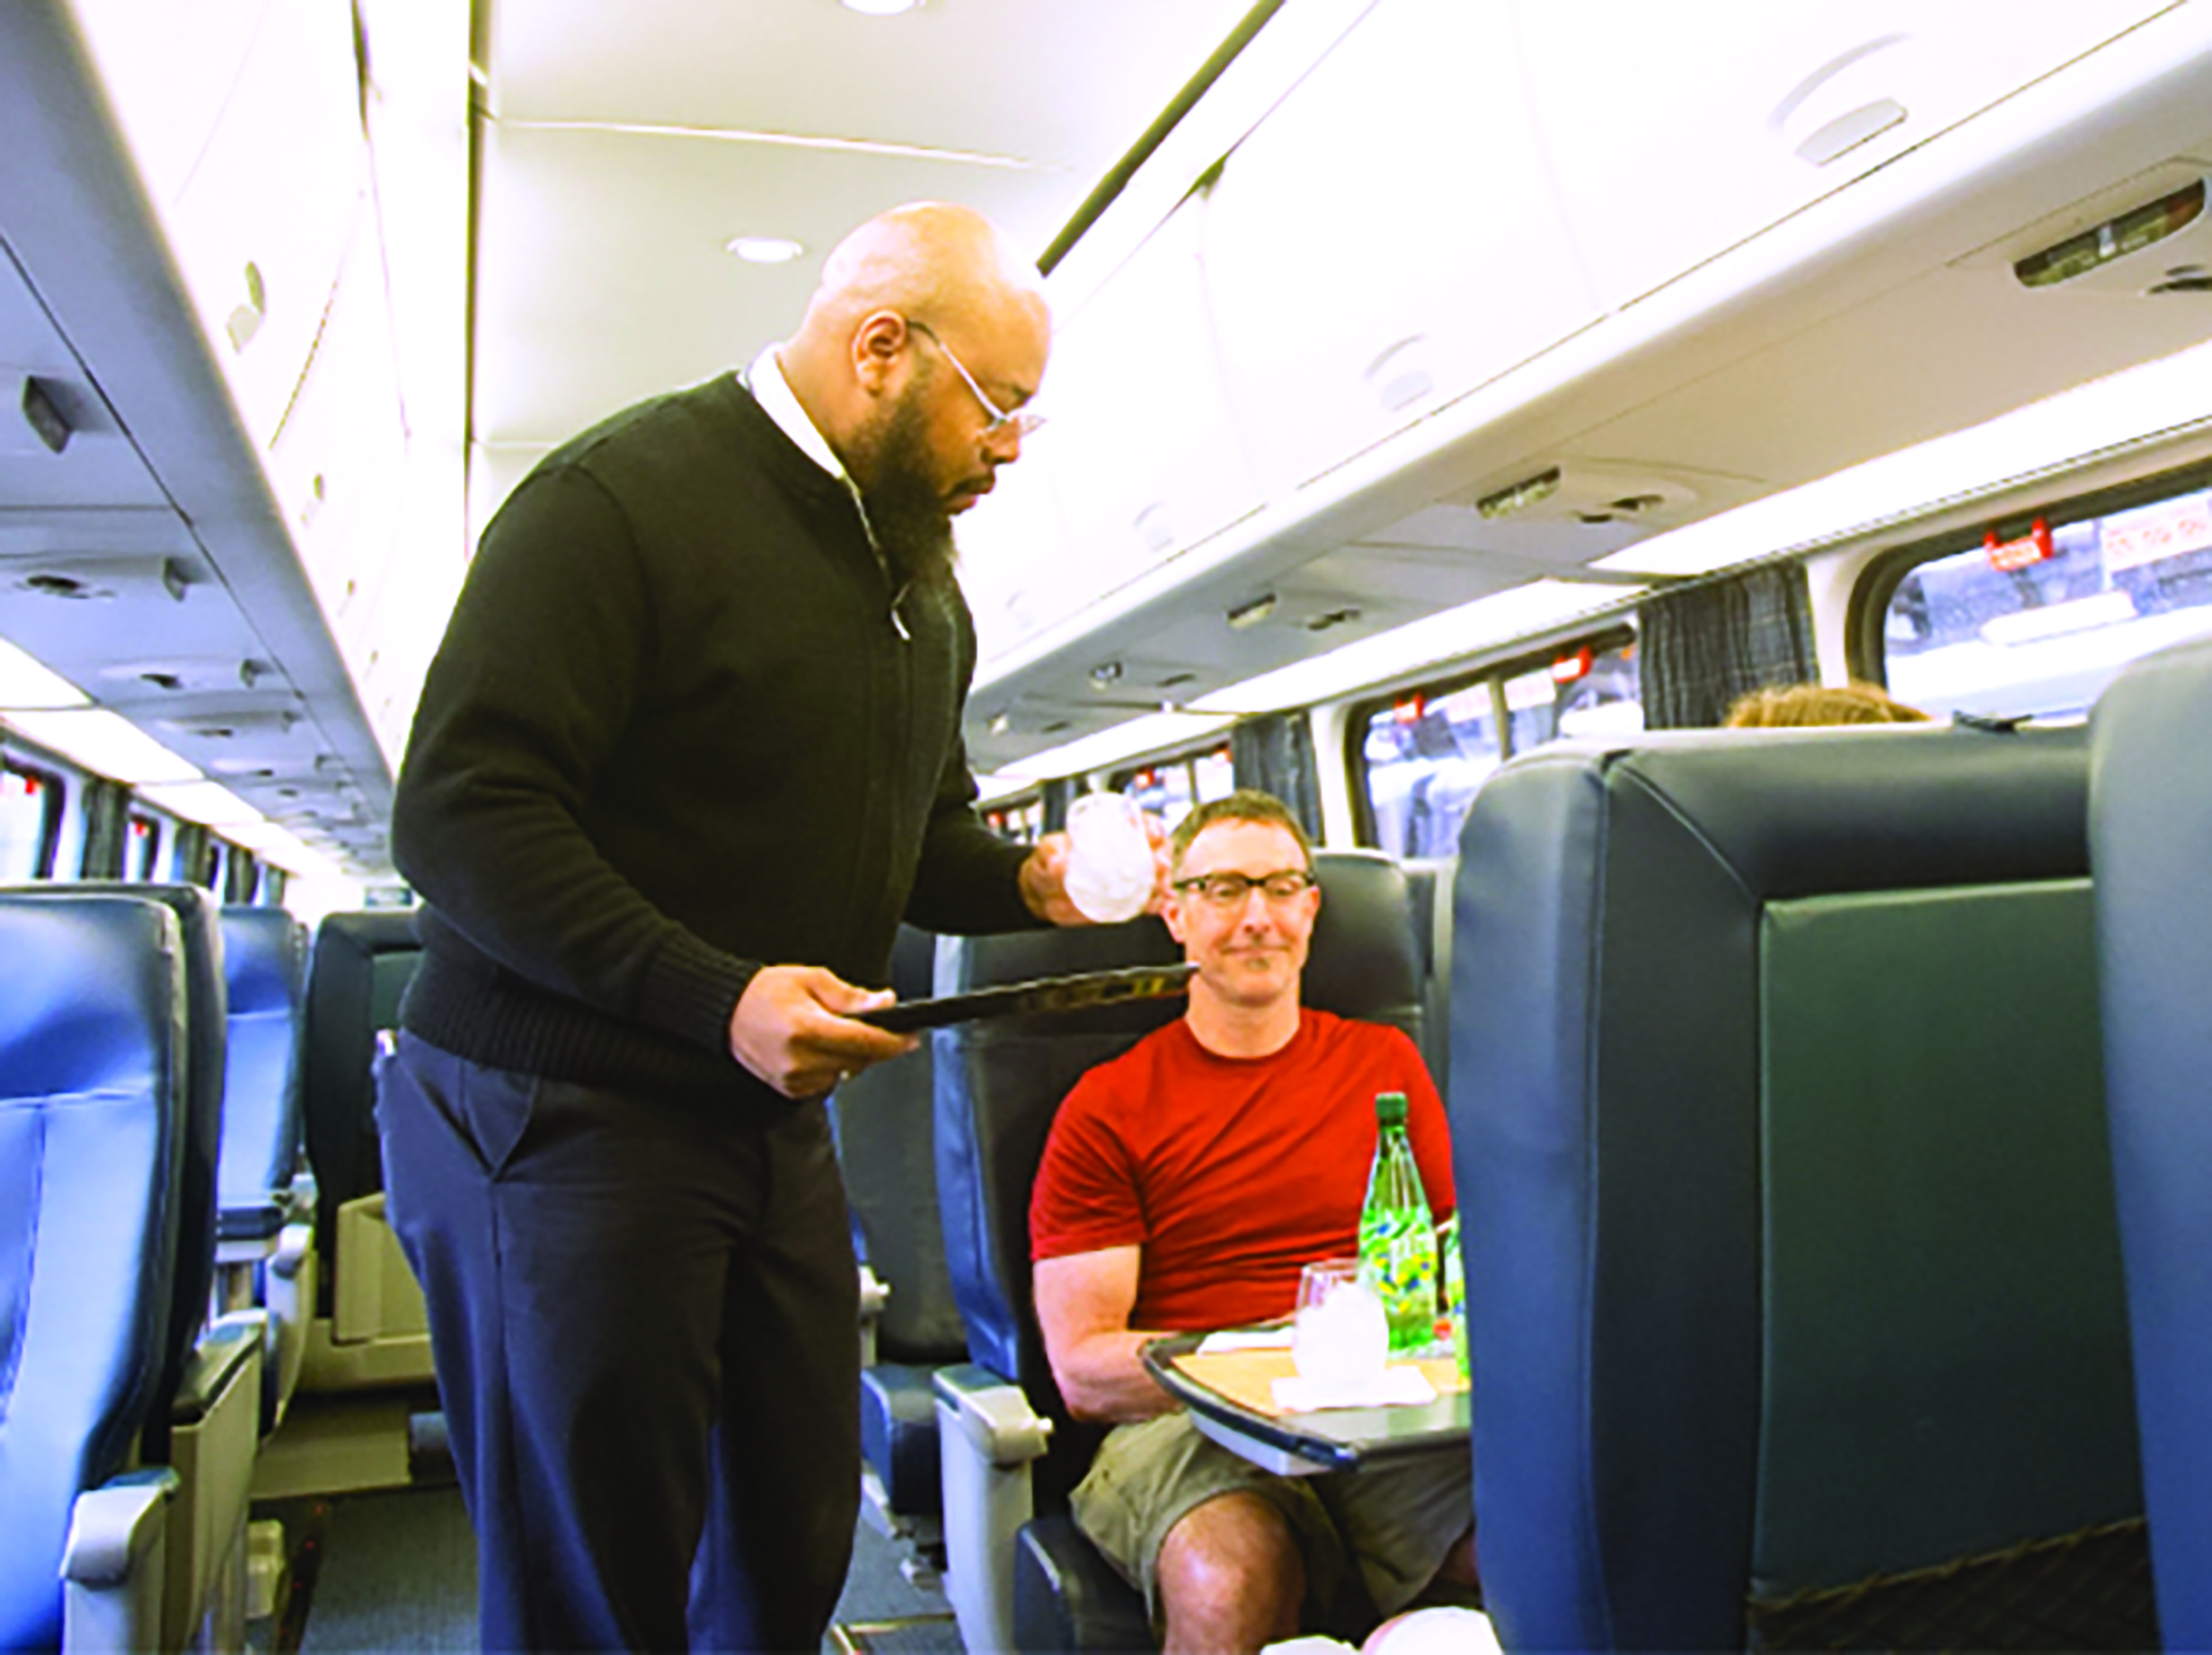 Amtrak To Refresh Interiors Of Acela Express Trains Points